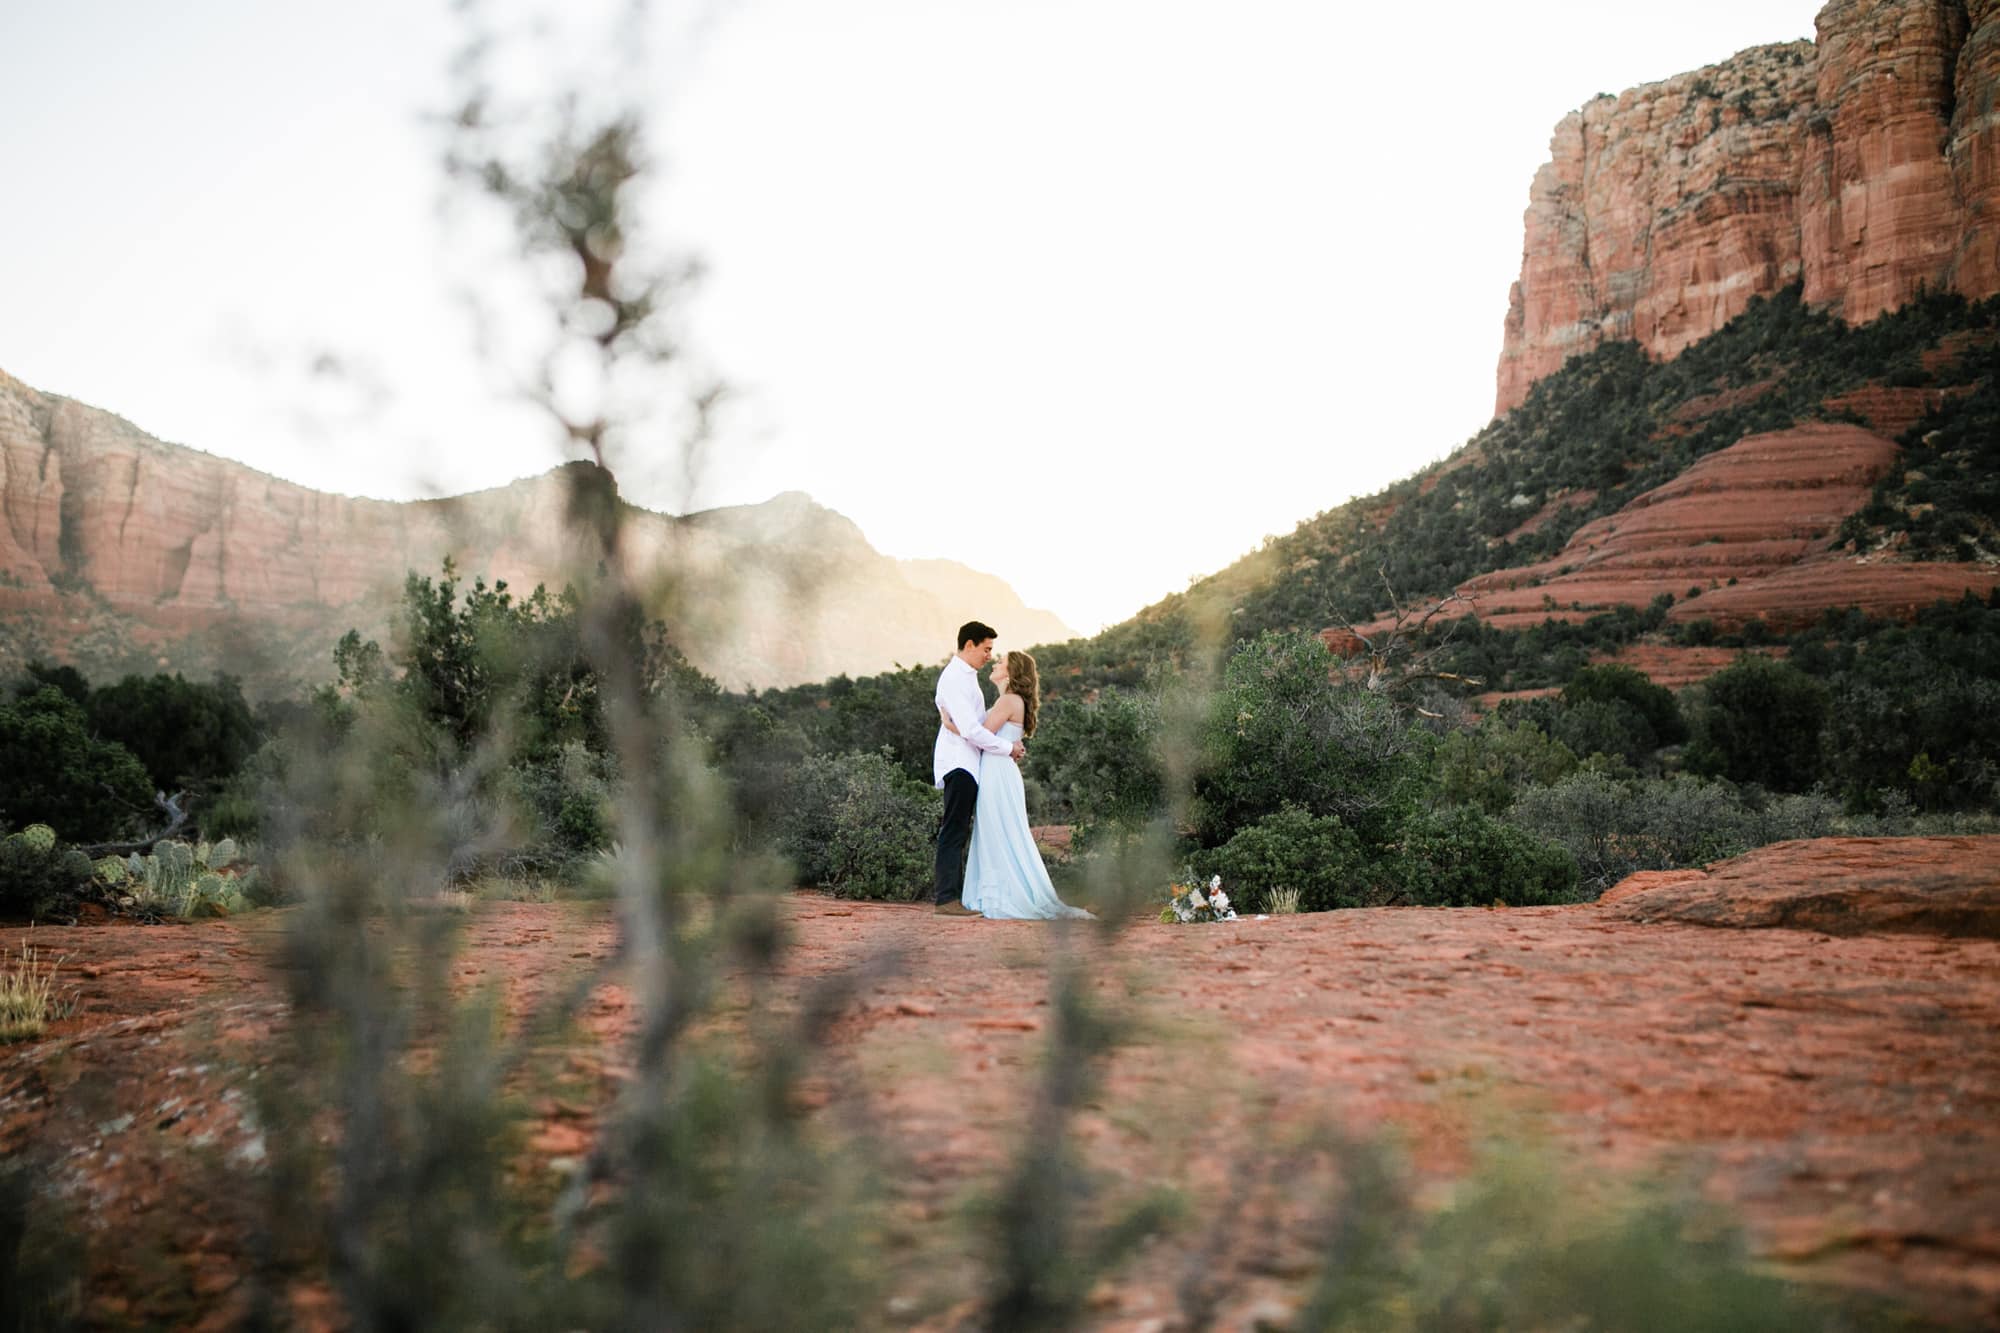 Framed by desert scrub with the sun rising behind them, the couple looks at each other during their Sedona Adventure Wedding.